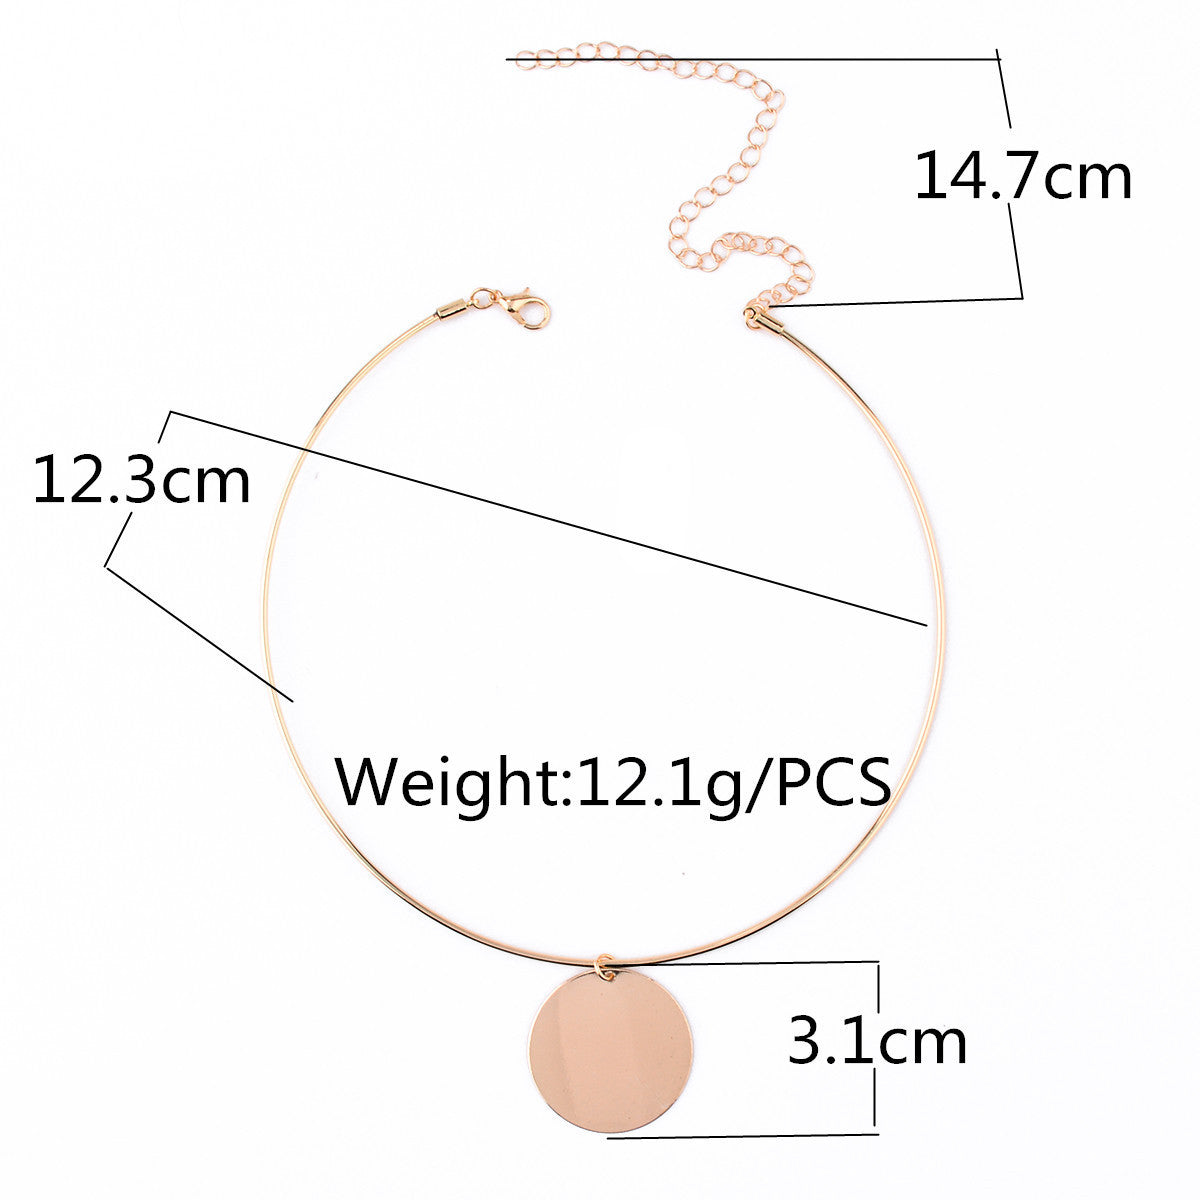 Copper Collar Sequins Clavicle Necklace - Oh Yours Fashion - 5